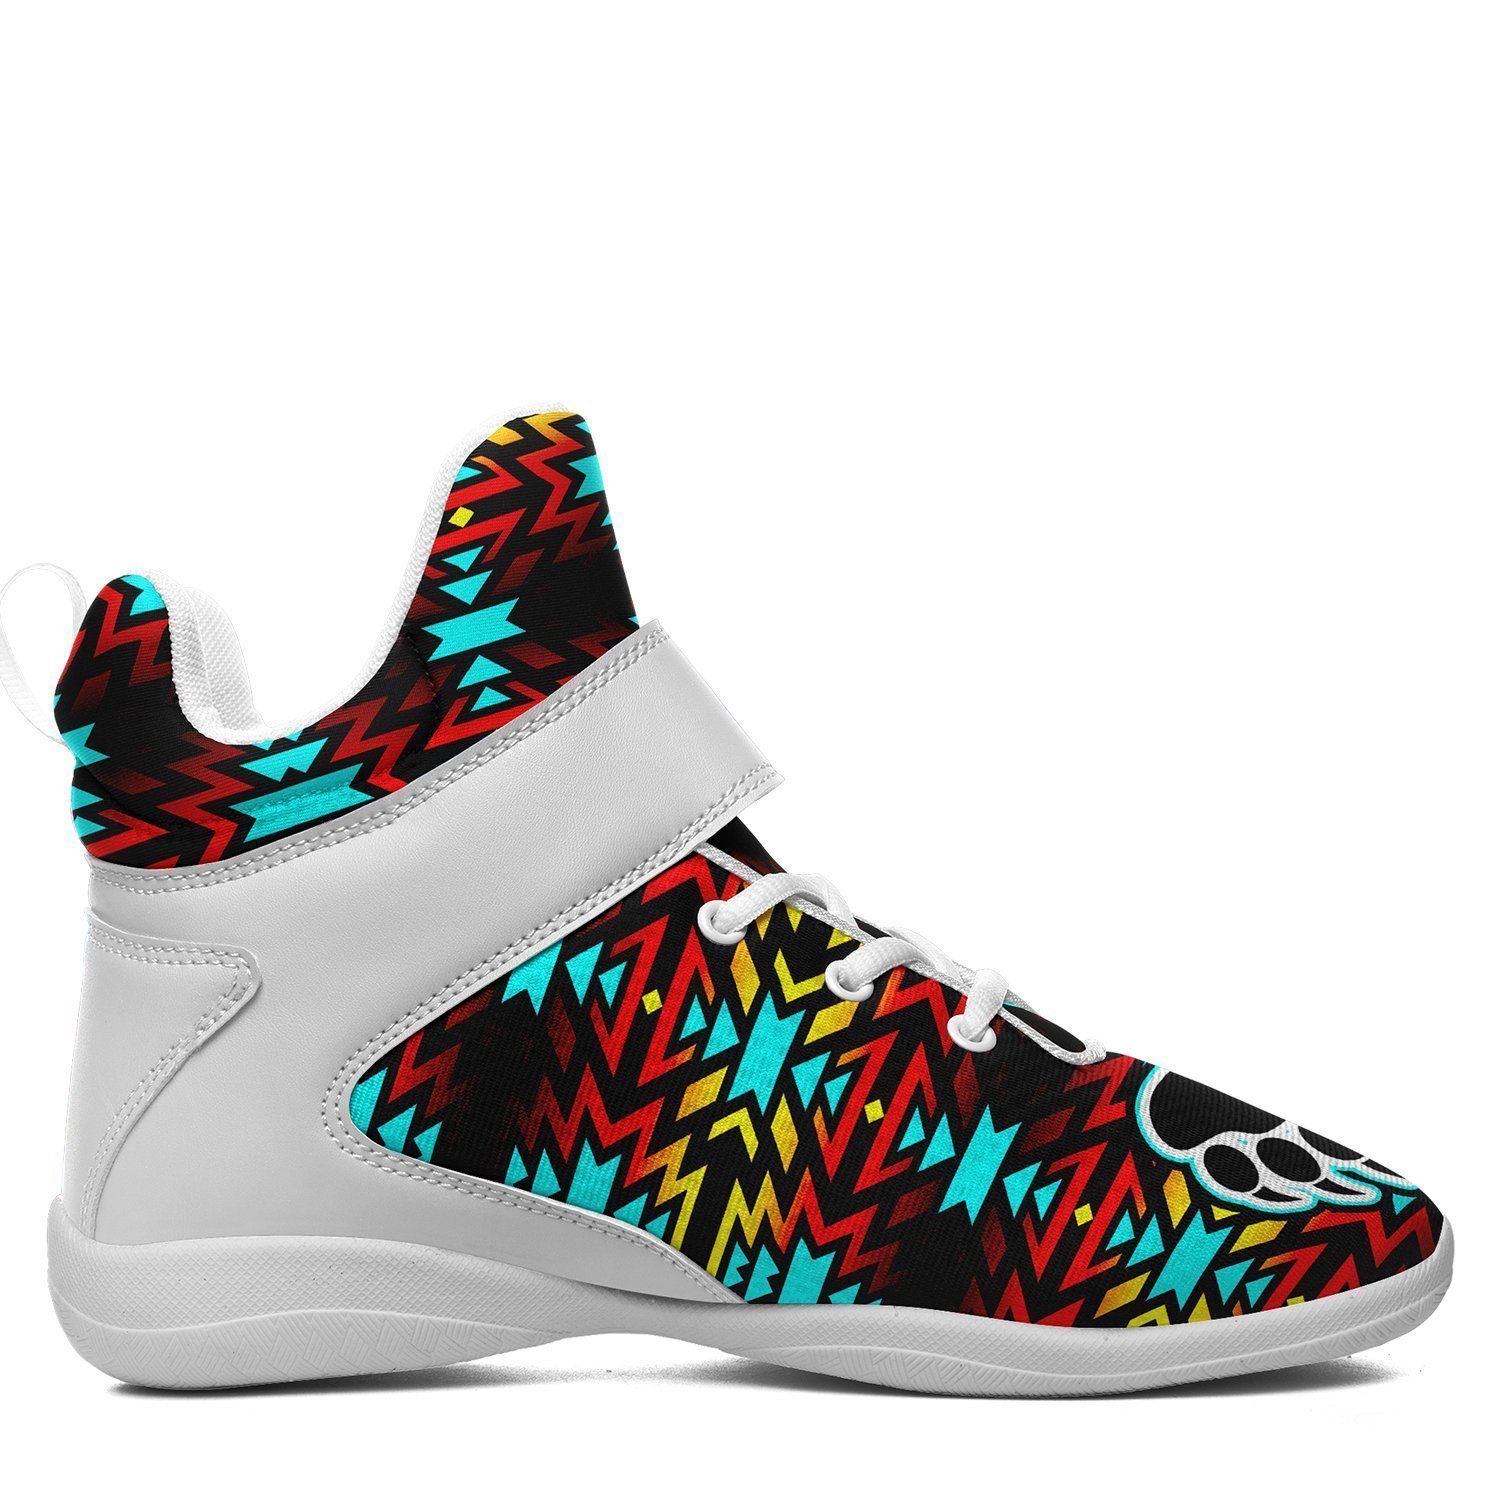 Fire Colors and Turquoise Bearpaw Ipottaa Basketball / Sport High Top Shoes - White Sole 49 Dzine 